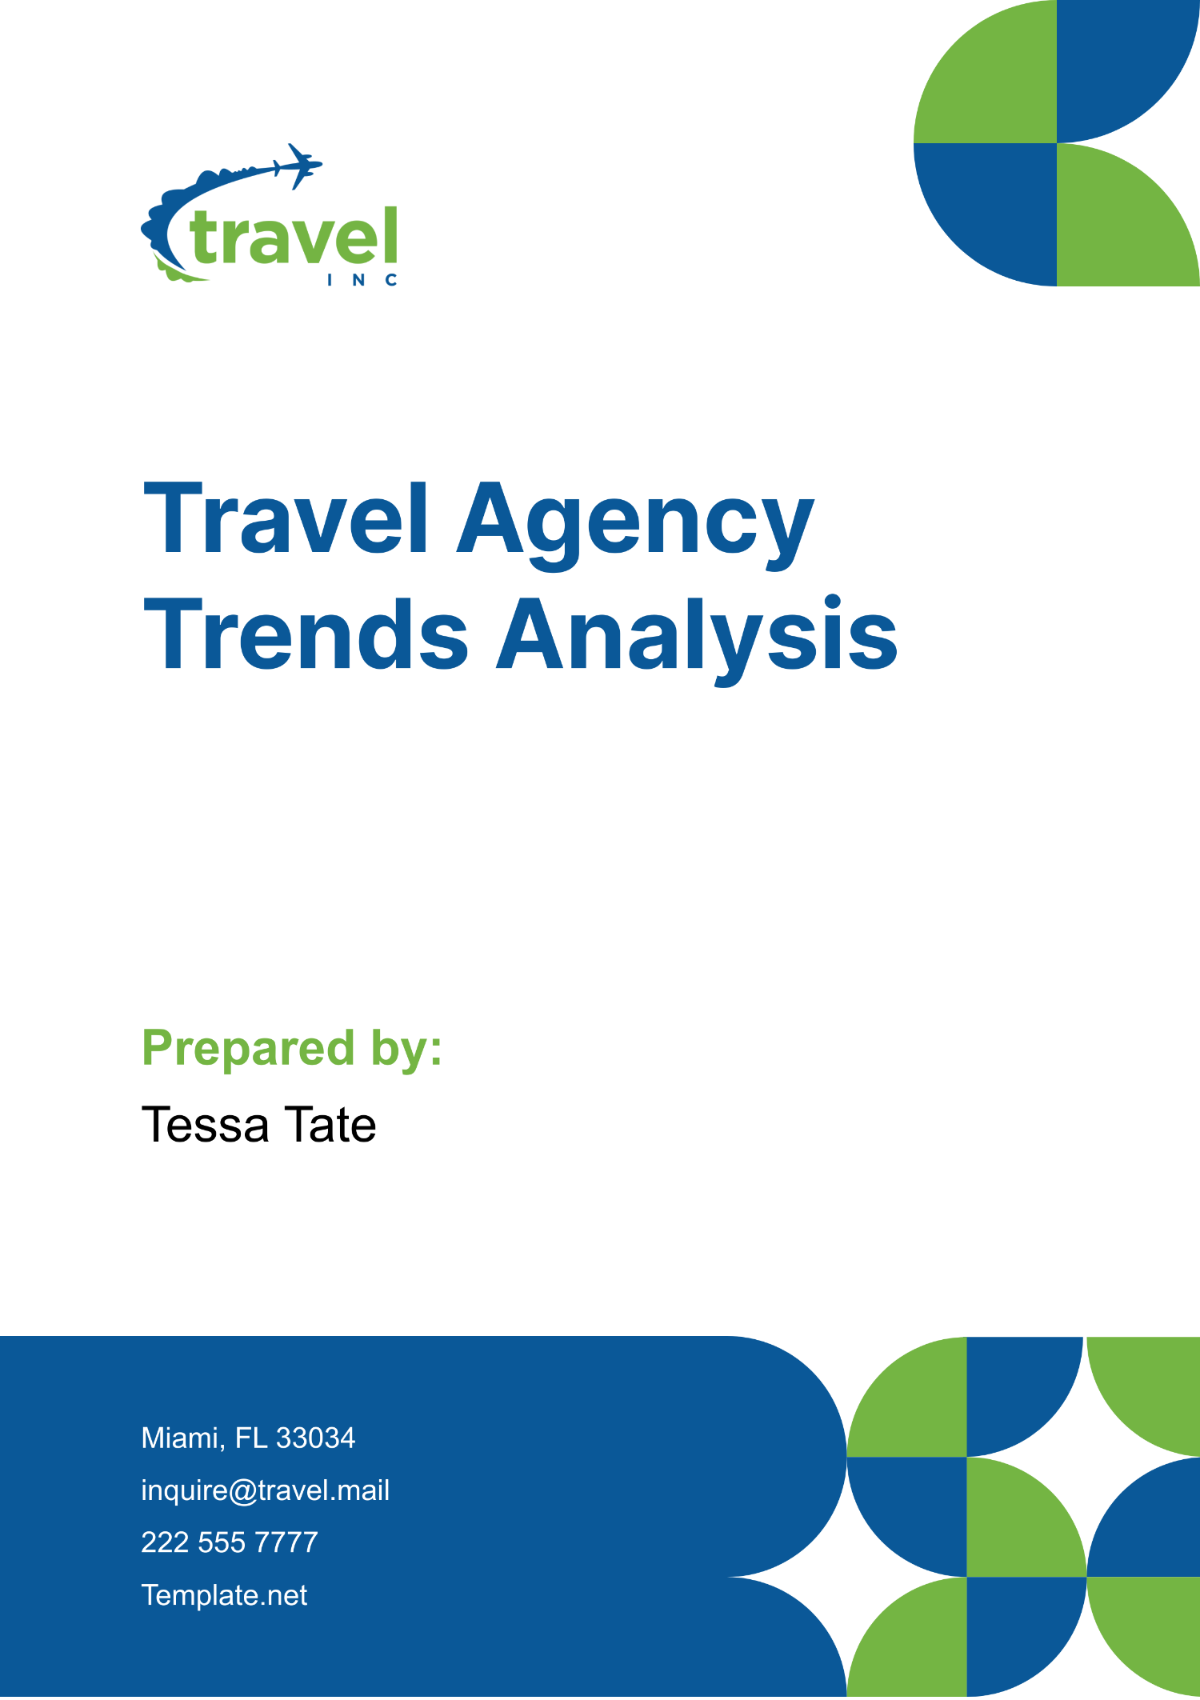 Travel Agency Trends Analysis Template